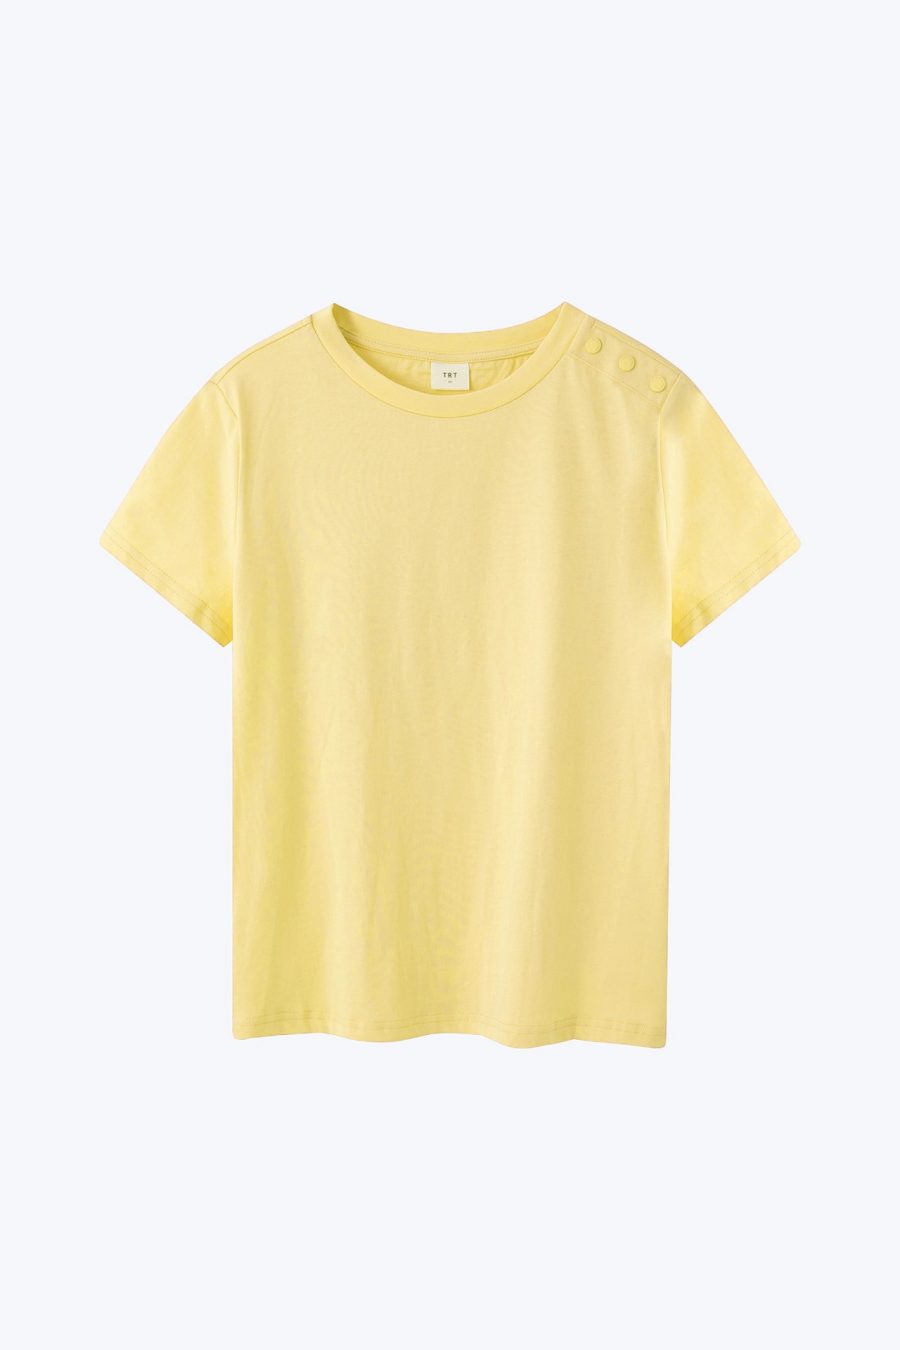 CT001060D Shoulder Button Tee CANARY